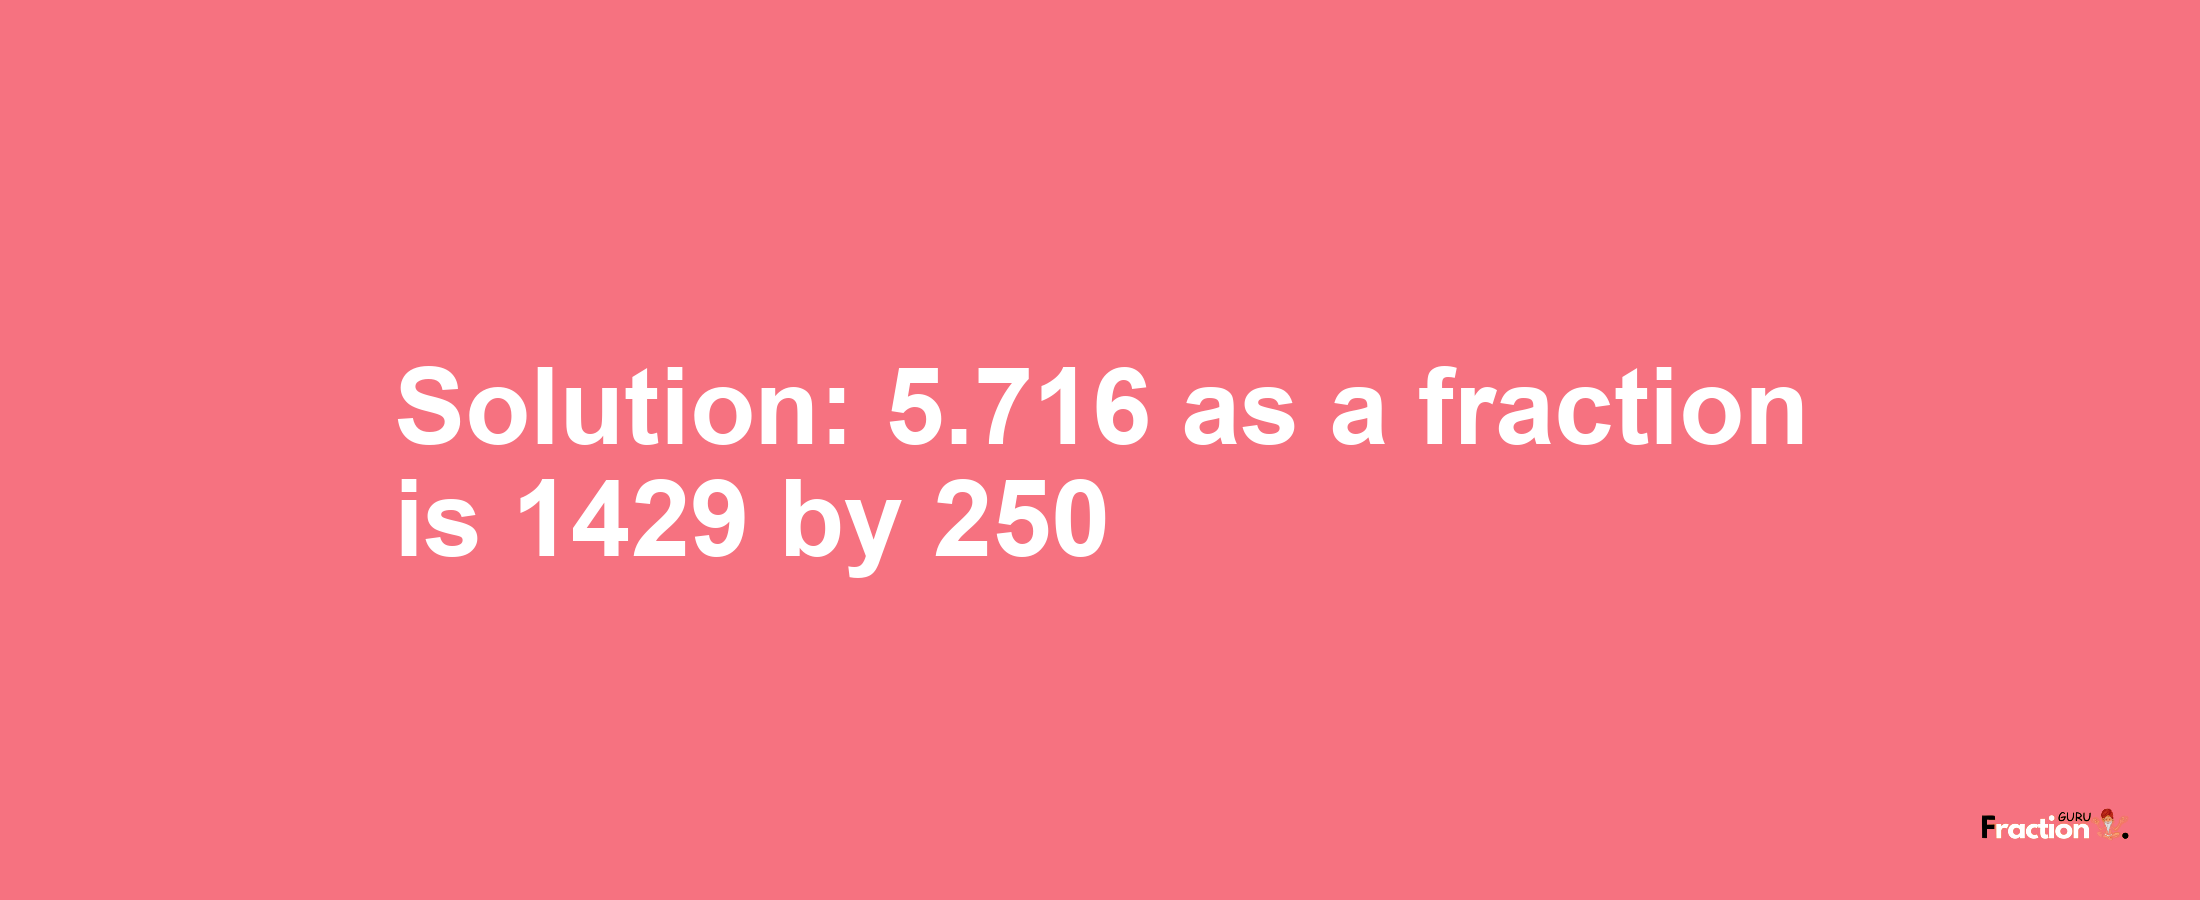 Solution:5.716 as a fraction is 1429/250